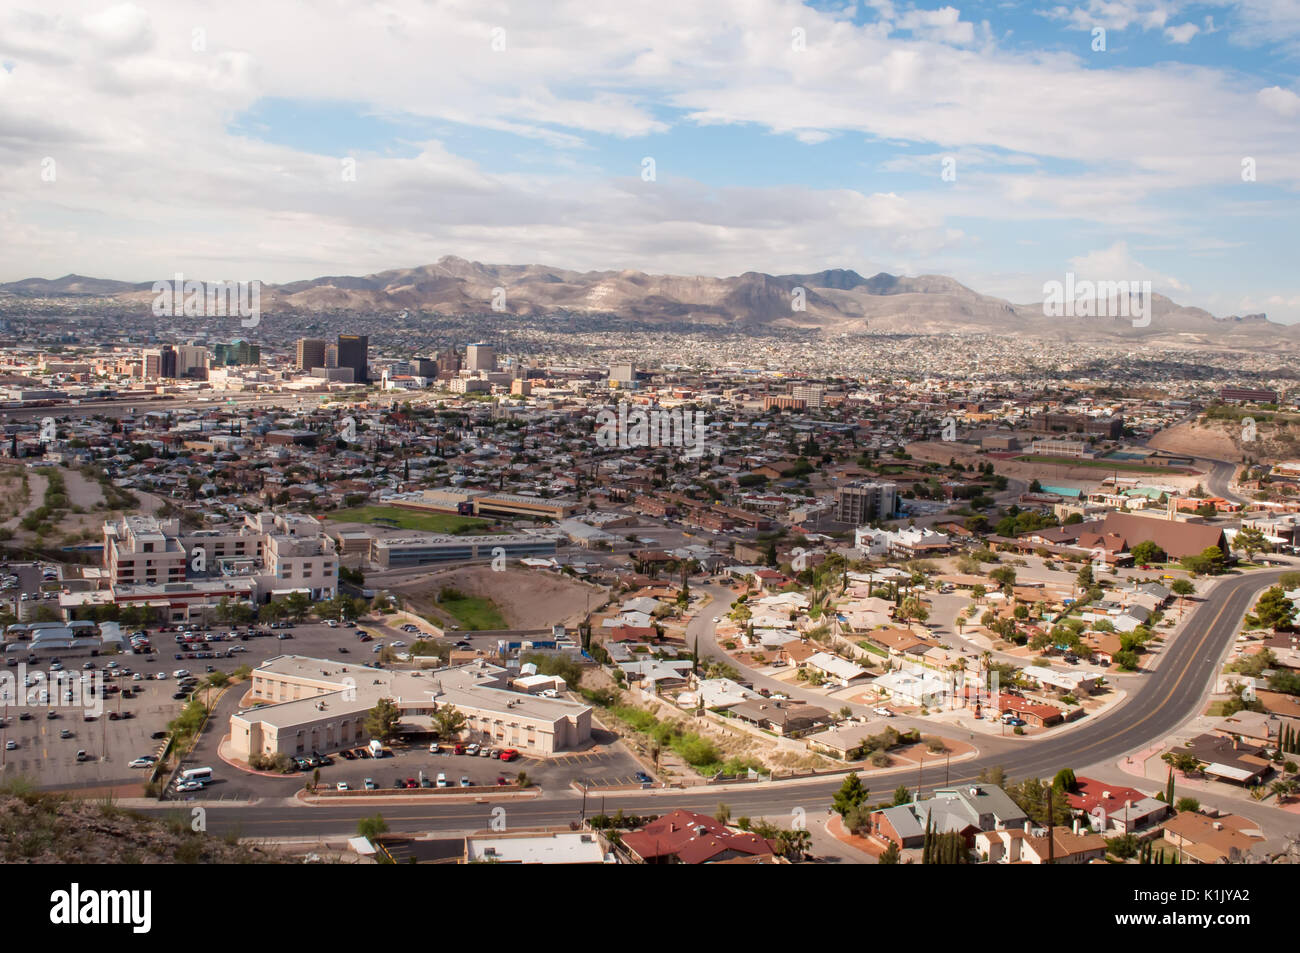 View of Juarez Mountains from Murchison Rogers Park in El Paso, TX, USA Stock Photo